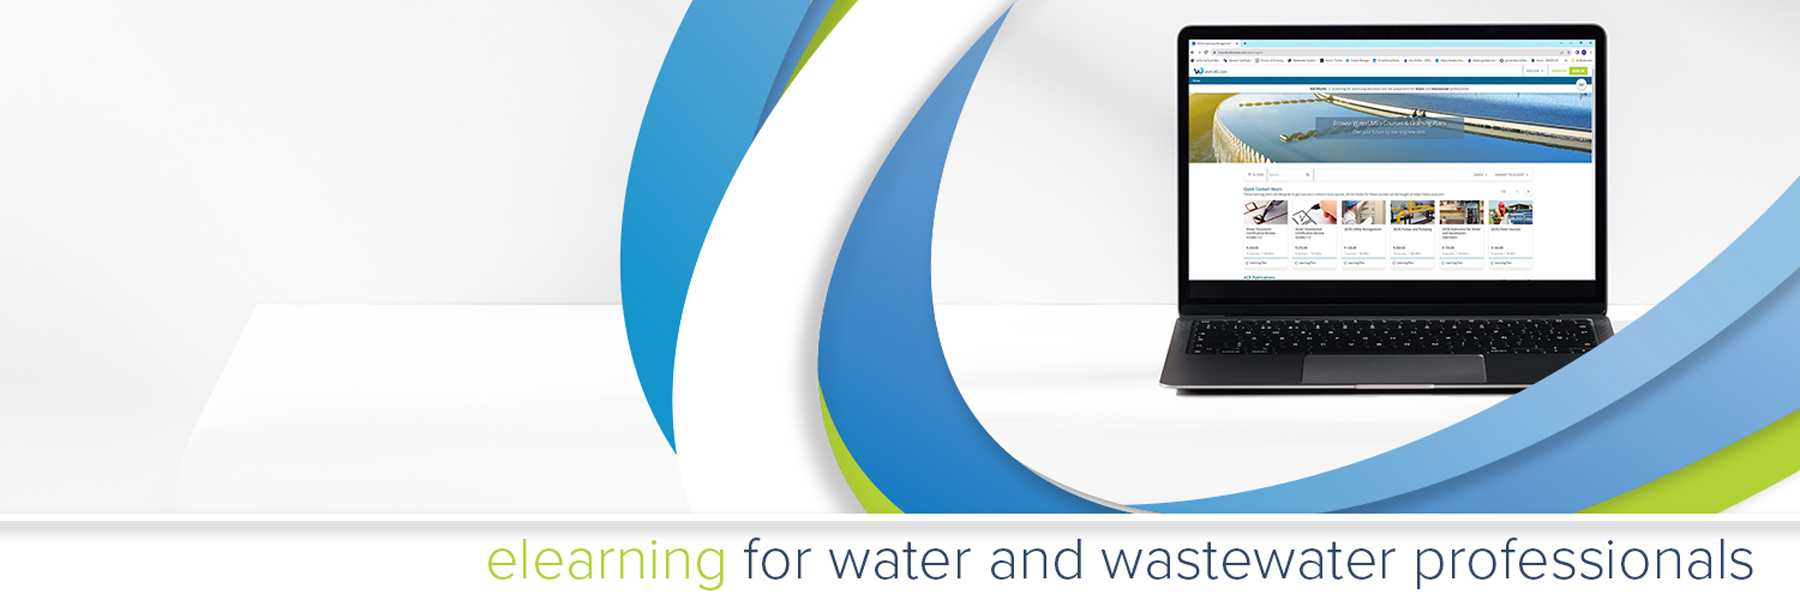 elearning for water and wastewater professionals